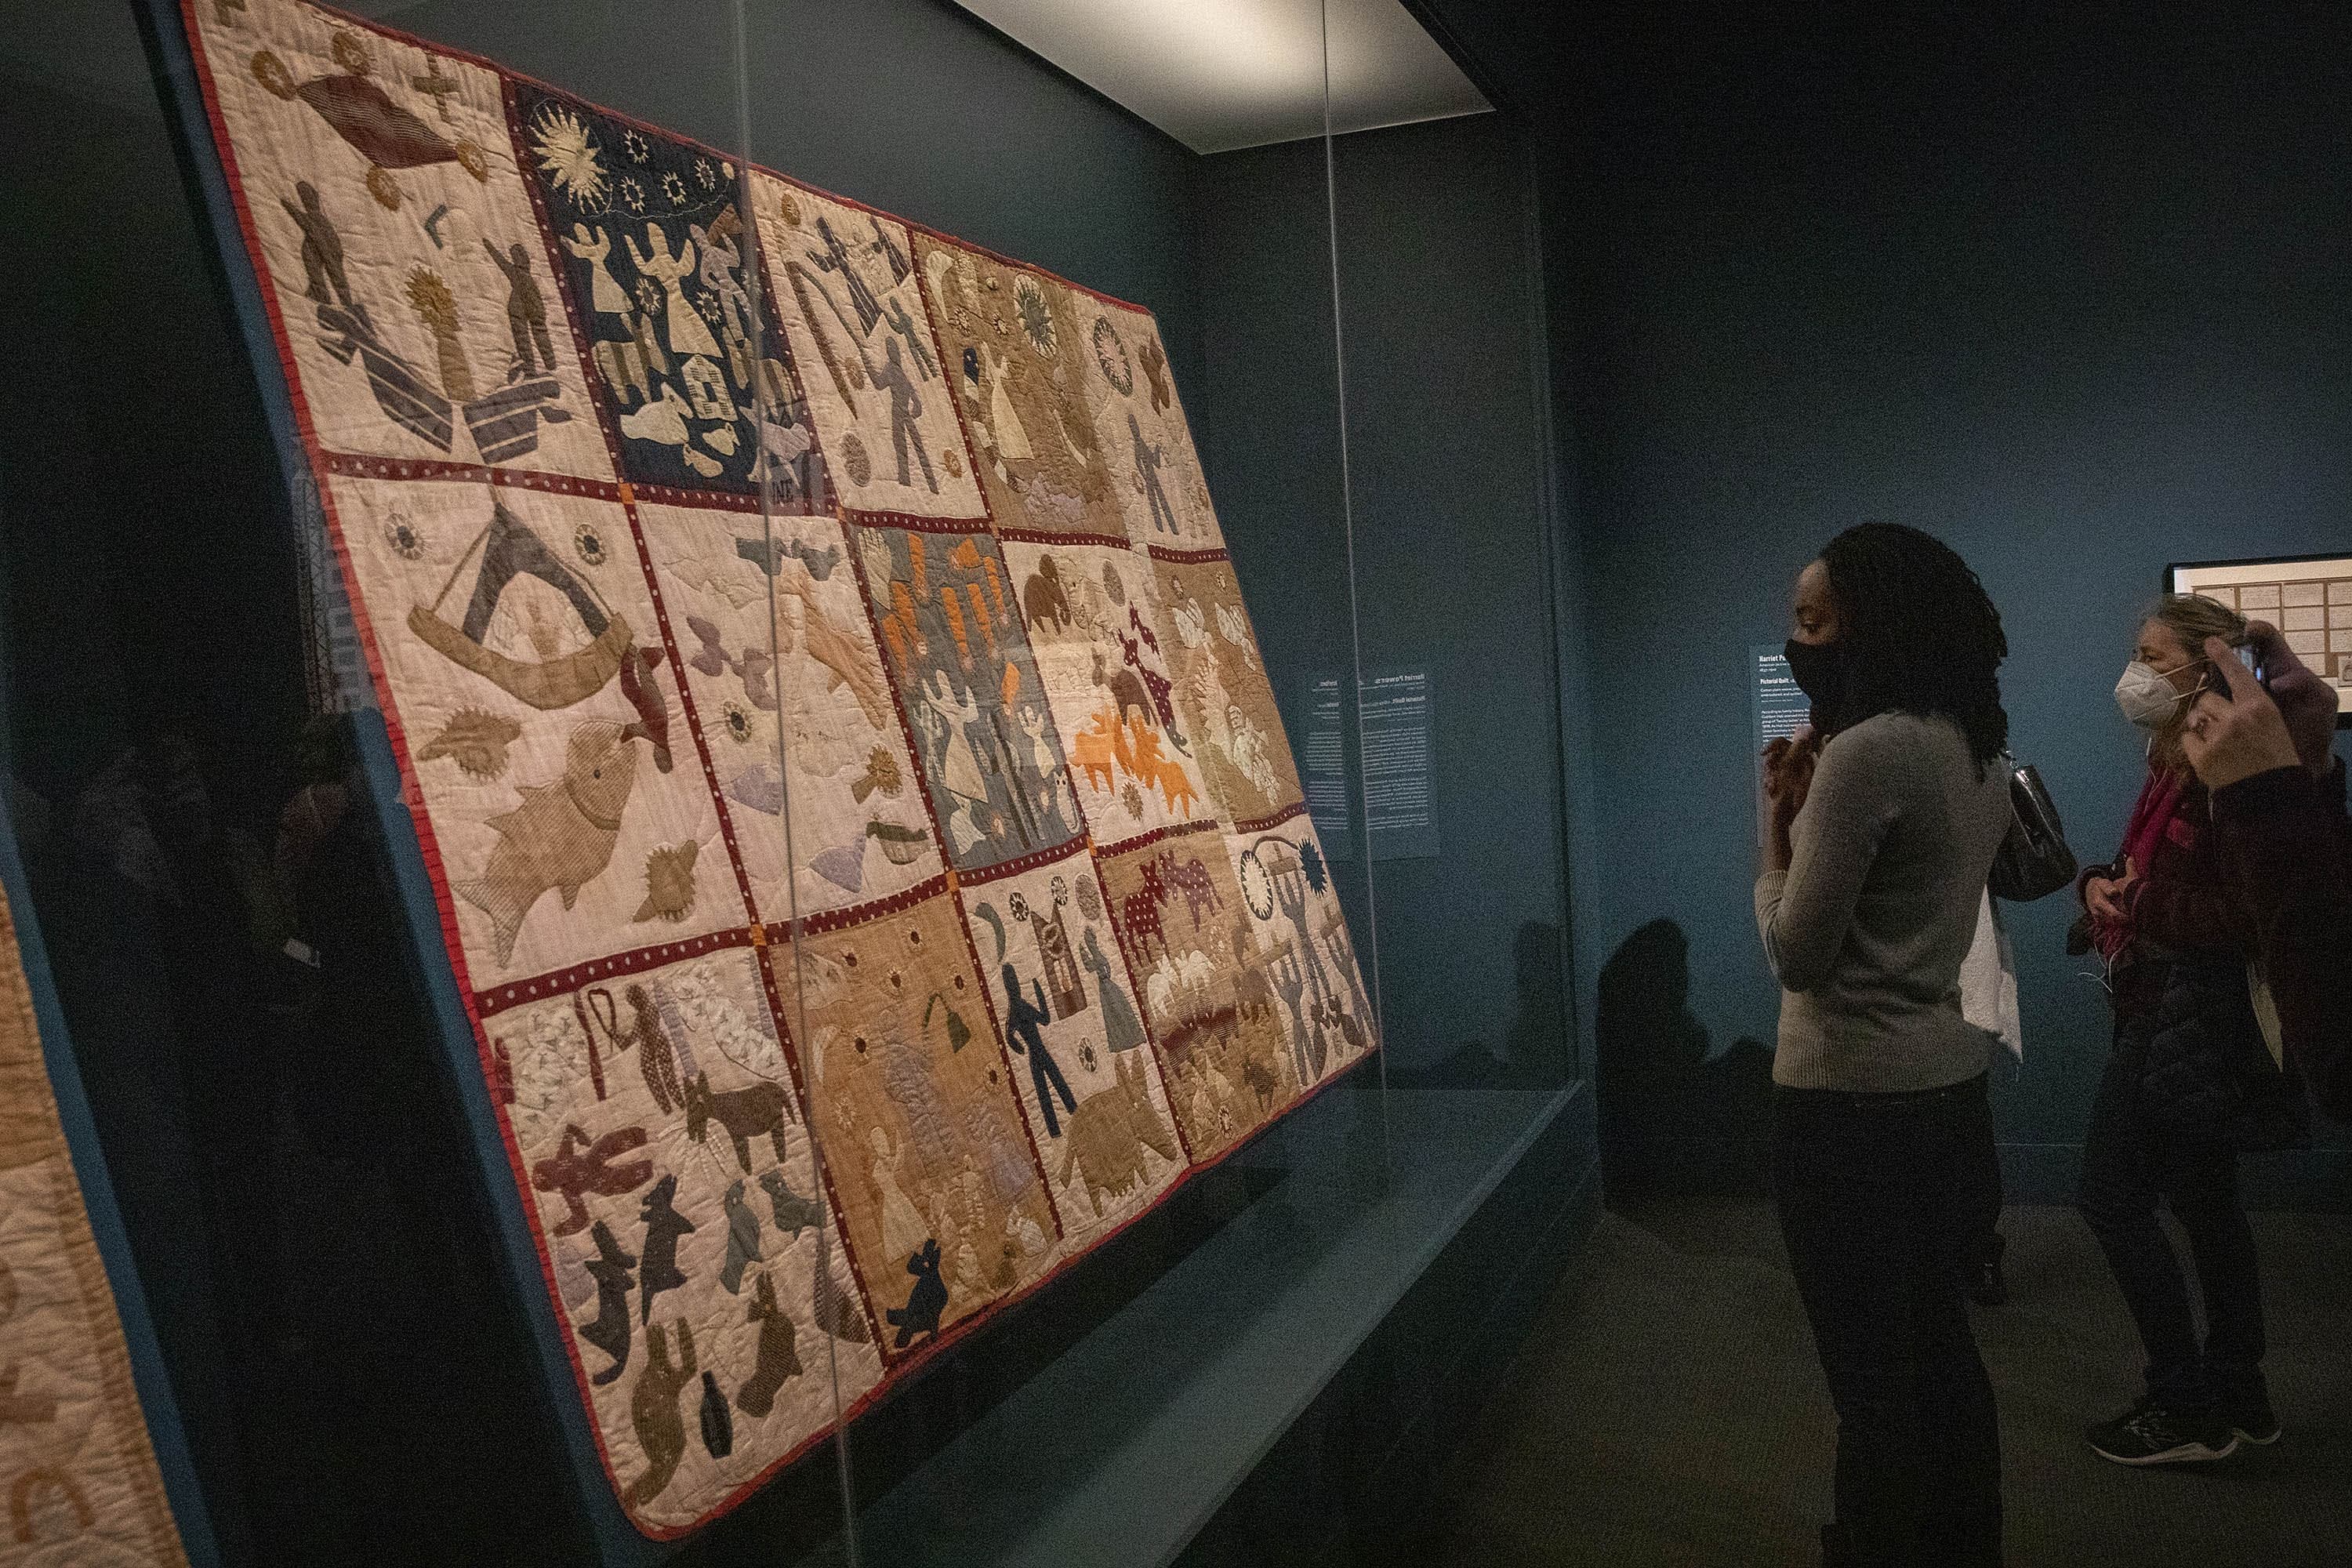 Alyse Minter, a descendent of Harriet Powers, contemplates Powers' Pictorial Quilt on display in the MFA's exhibit "Fabric of a Nation: American Quilt Stories." (Robin Lubbock/WBUR)